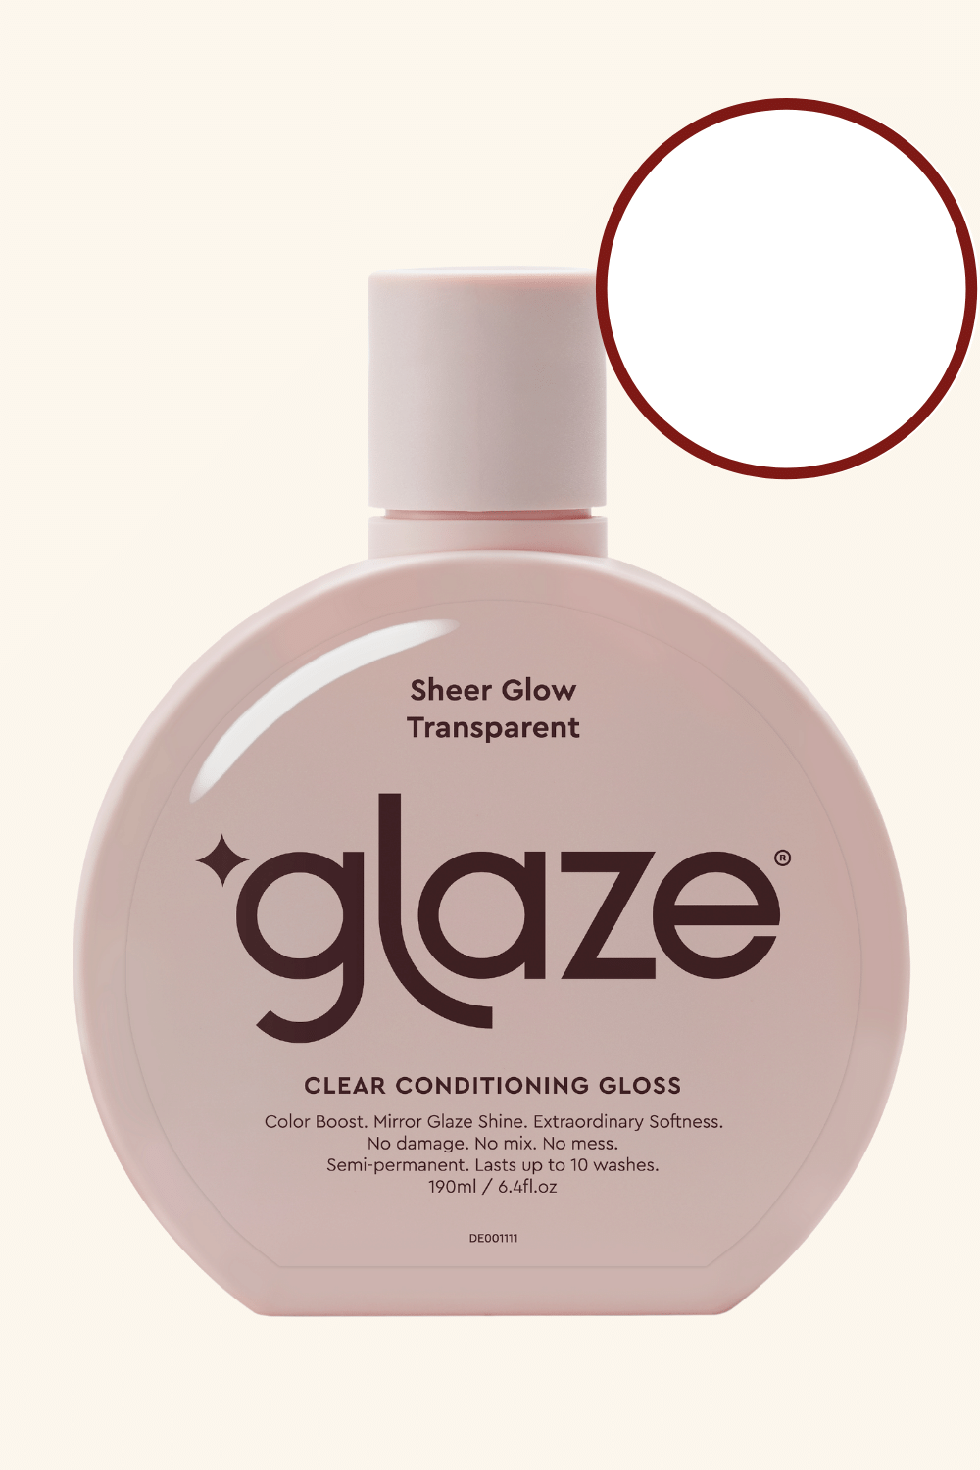 Super Gloss Clear Conditioning Gloss